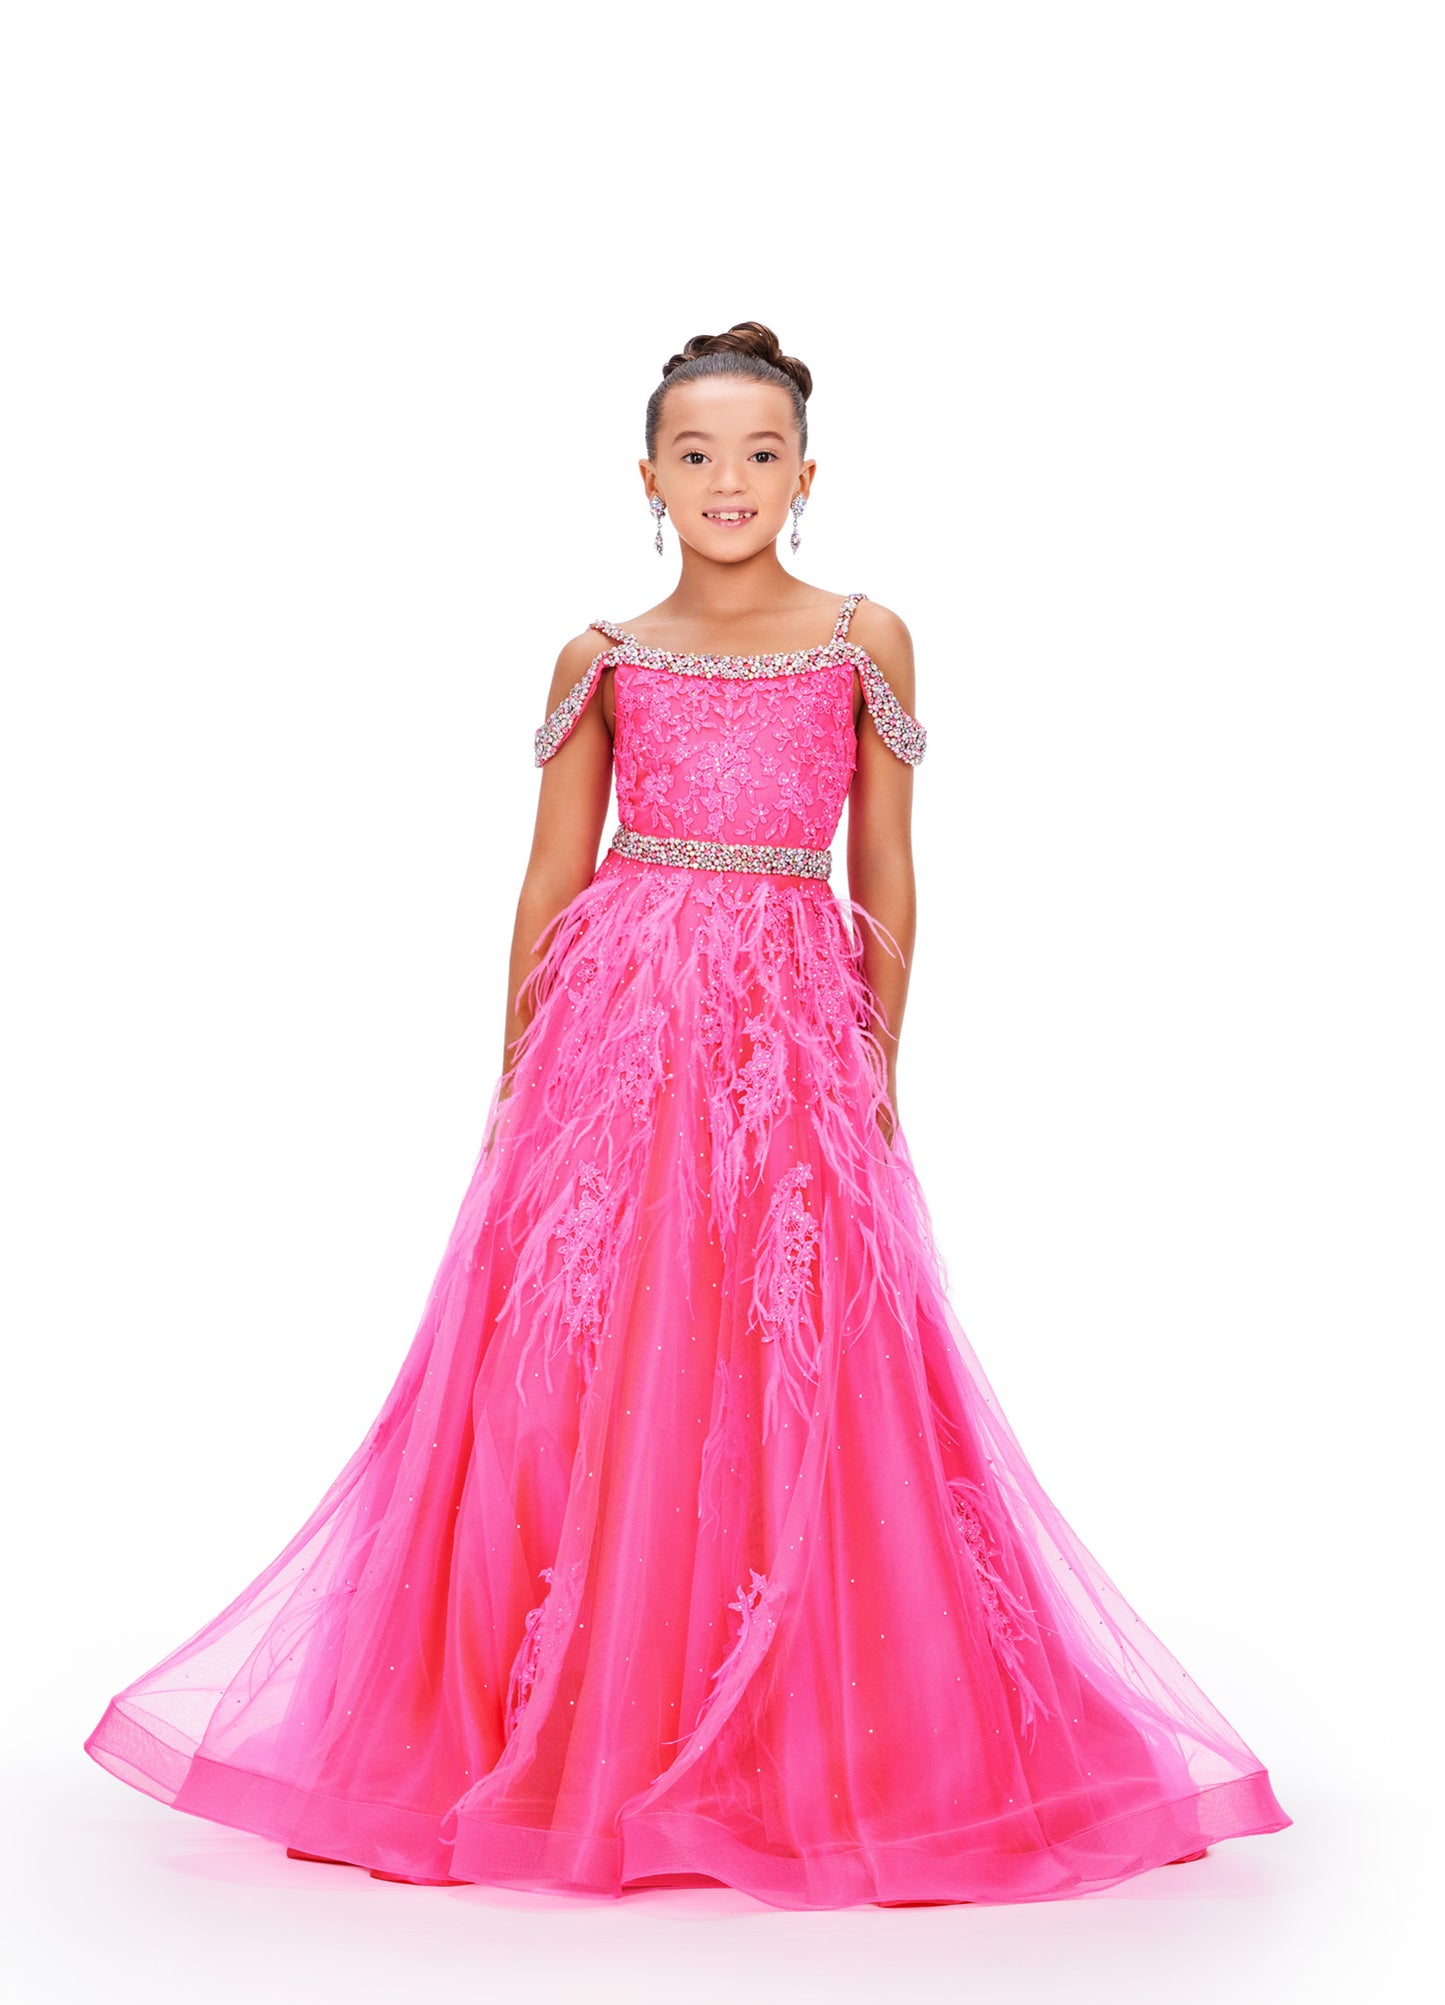 Experience the epitome of elegance and grace with the Ashley Lauren Kids 8242 Girls Lace Feather Pageant Dress. Featuring delicate lace and stunning feather accents, this off the shoulder ballgown is the perfect choice for any special occasion. Its impeccable design and craftsmanship will make your little girl feel like a true princess. This gorgeous kids gown is embellished with crystal beaded straps, neckline trim and belt. The dress is adorned with lace applique, press on stones and feather accents.